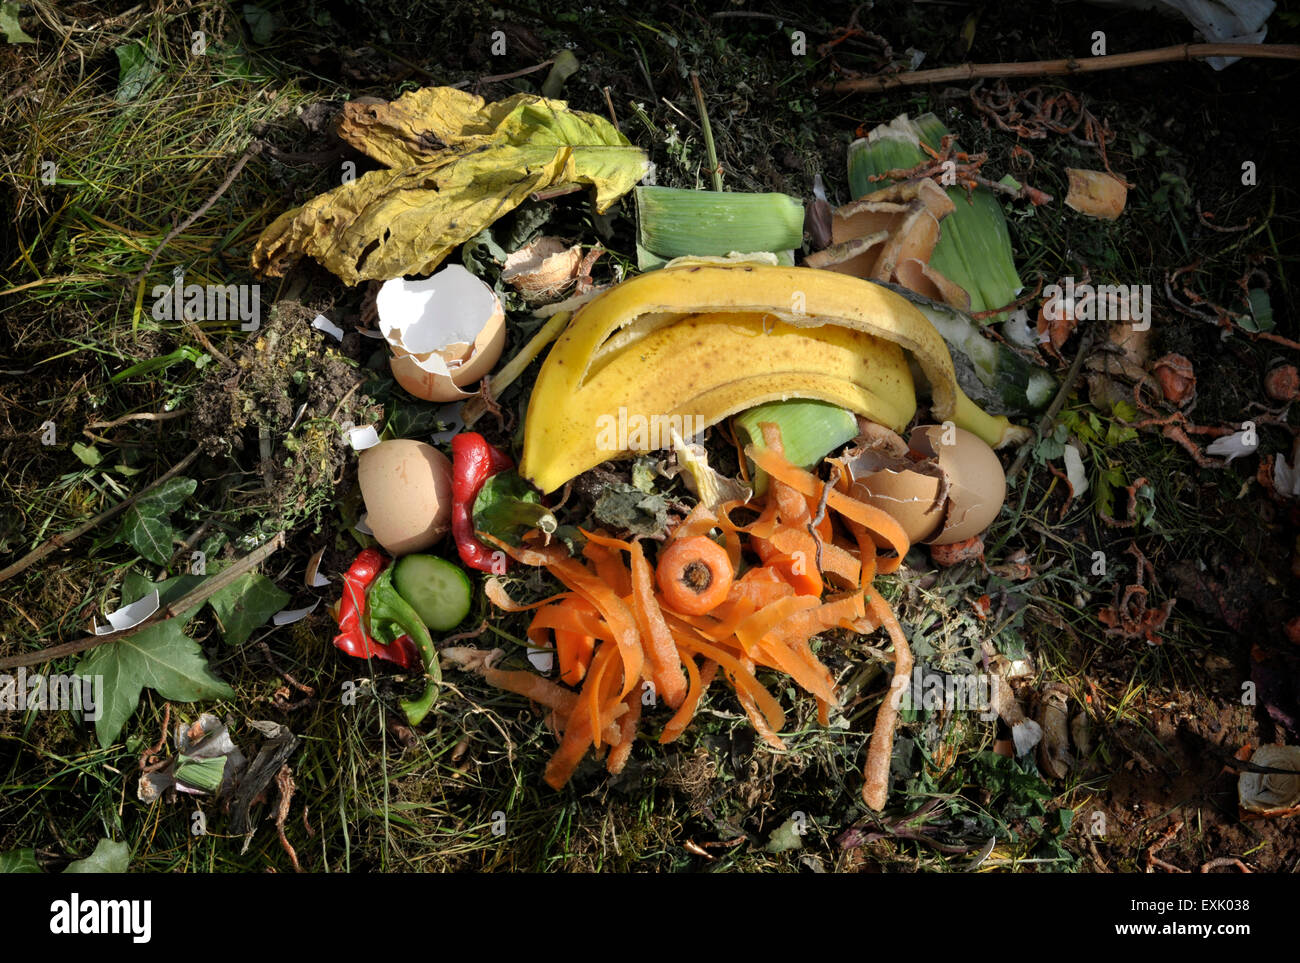 Kitchen waste and garden material on a home compost heap. Stock Photo